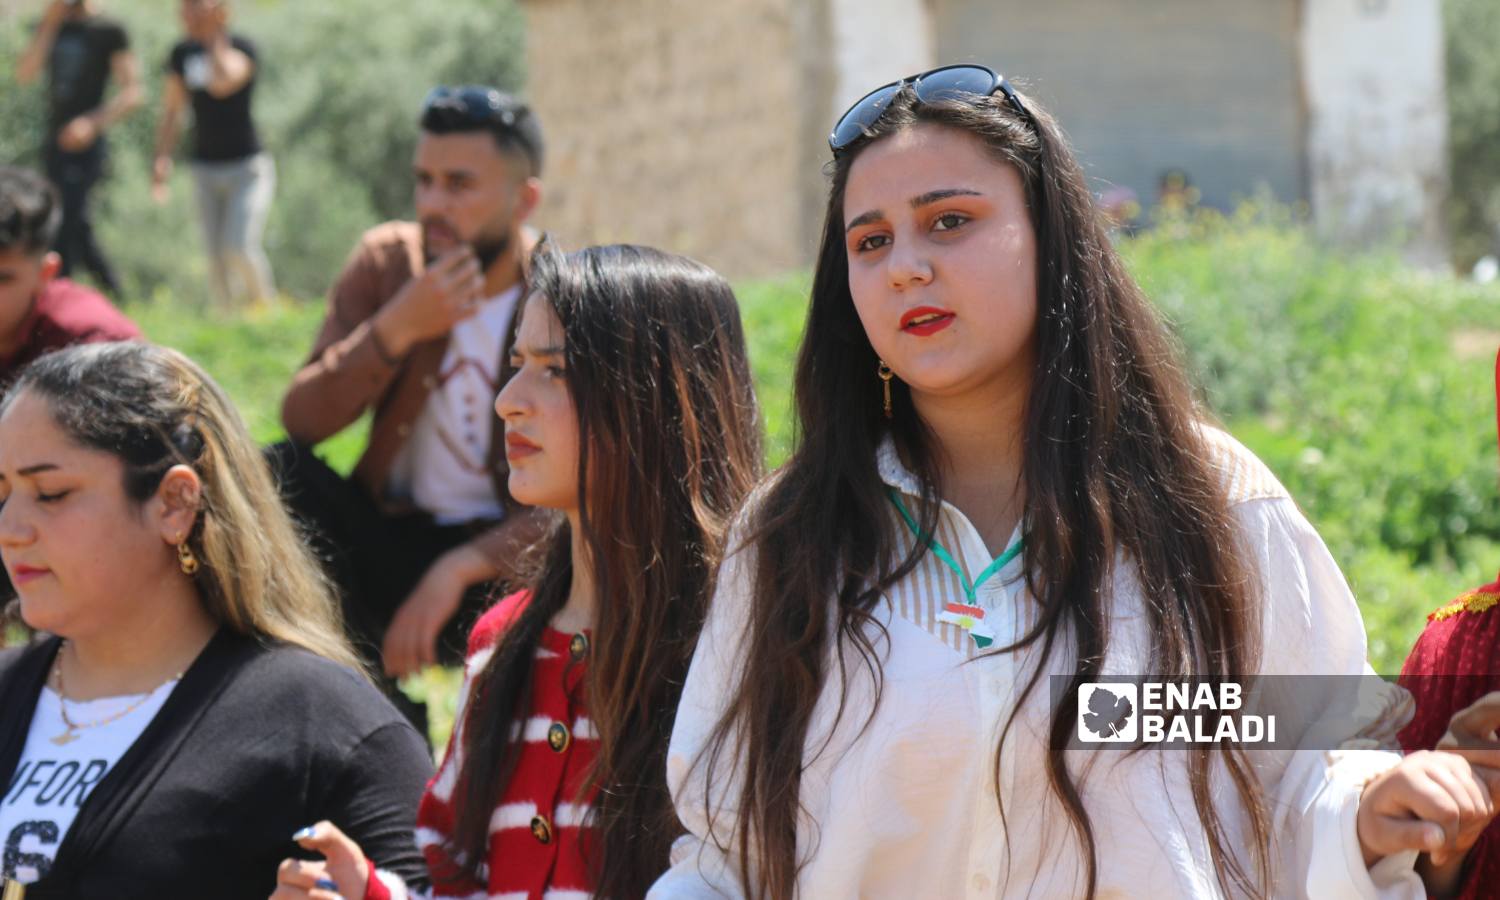 Yazidis celebrate Red Wednesday (Yazidi New Year/The first Wednesday of April according to the Eastern calendar) in Afrin - April 17, 2024 (Enab Baladi/Dayan Junpaz)
